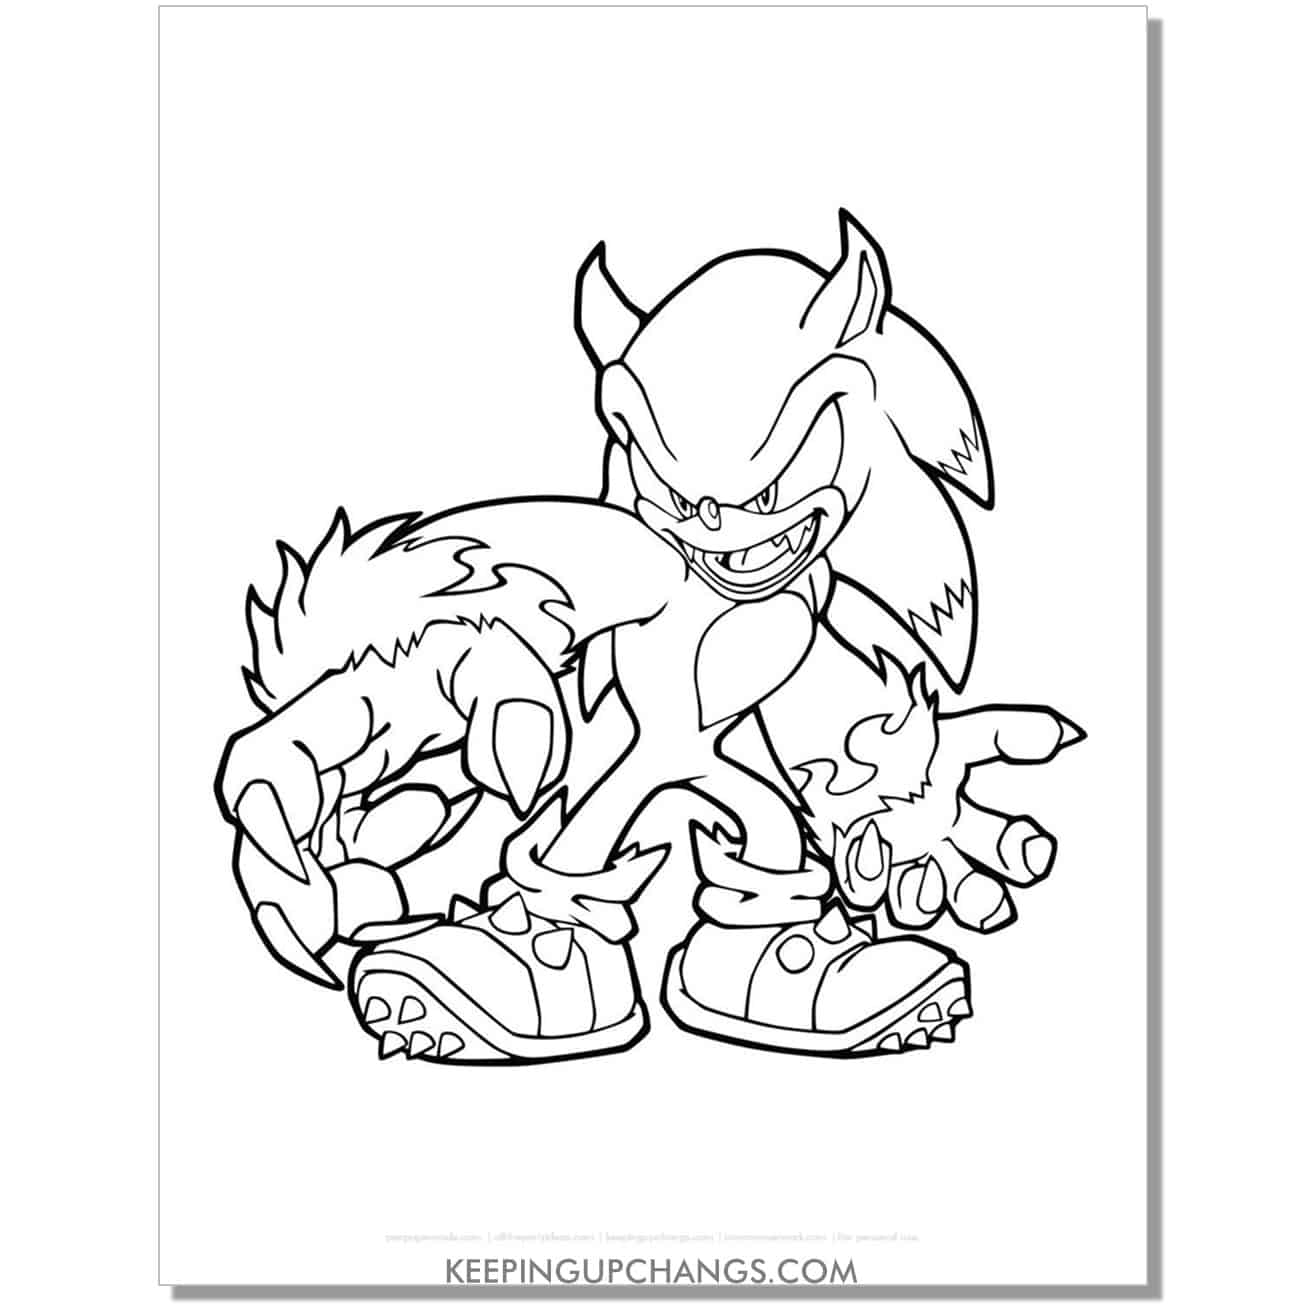 sonic as a werehog werewolf coloring page.